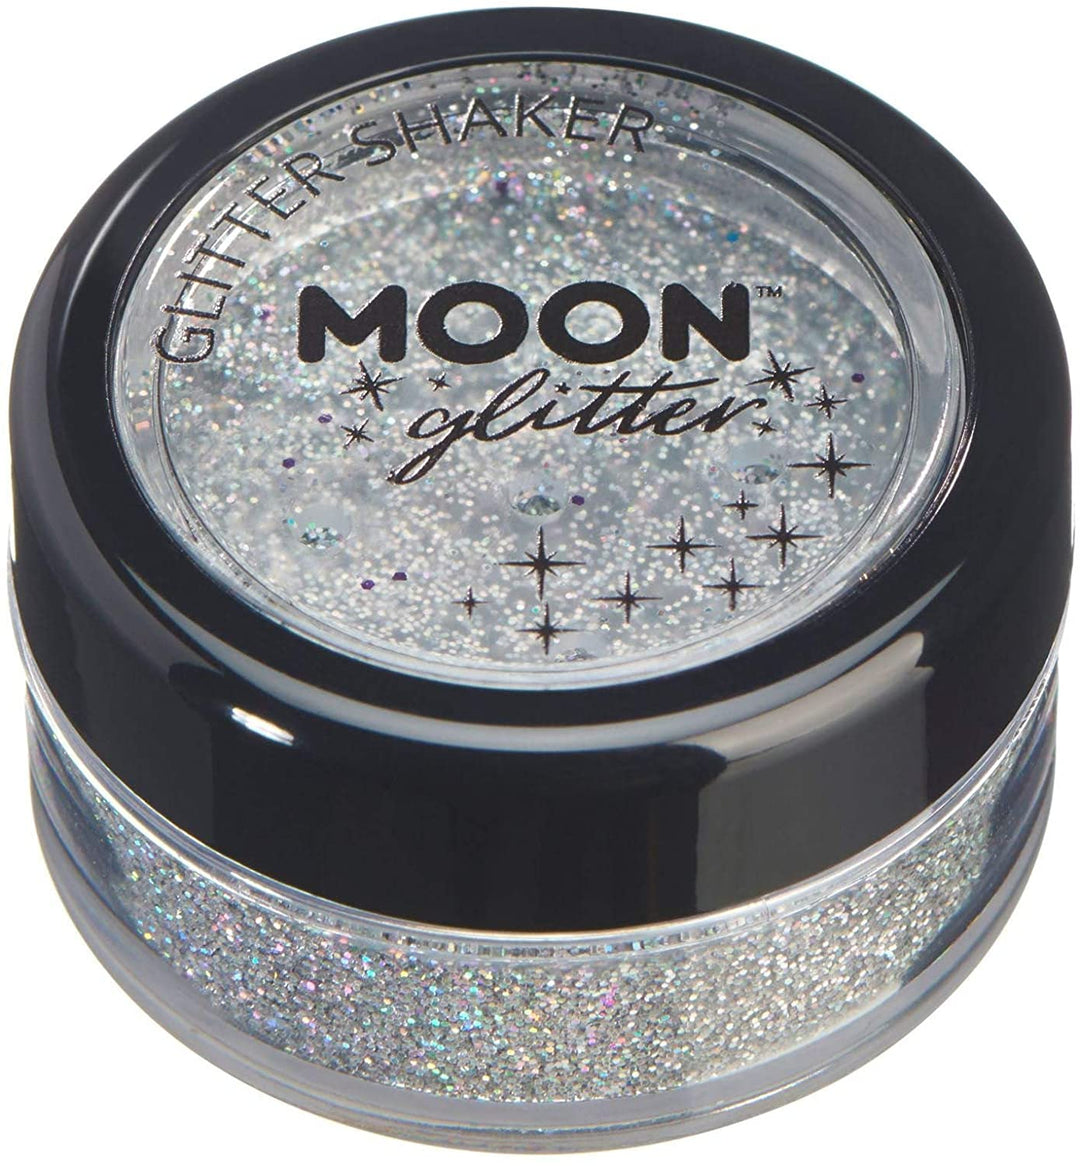 Holographic Glitter Shakers by Moon Glitter - Silver - Cosmetic Festival Makeup Glitter for Face, Body, Nails, Hair, Lips - 5g